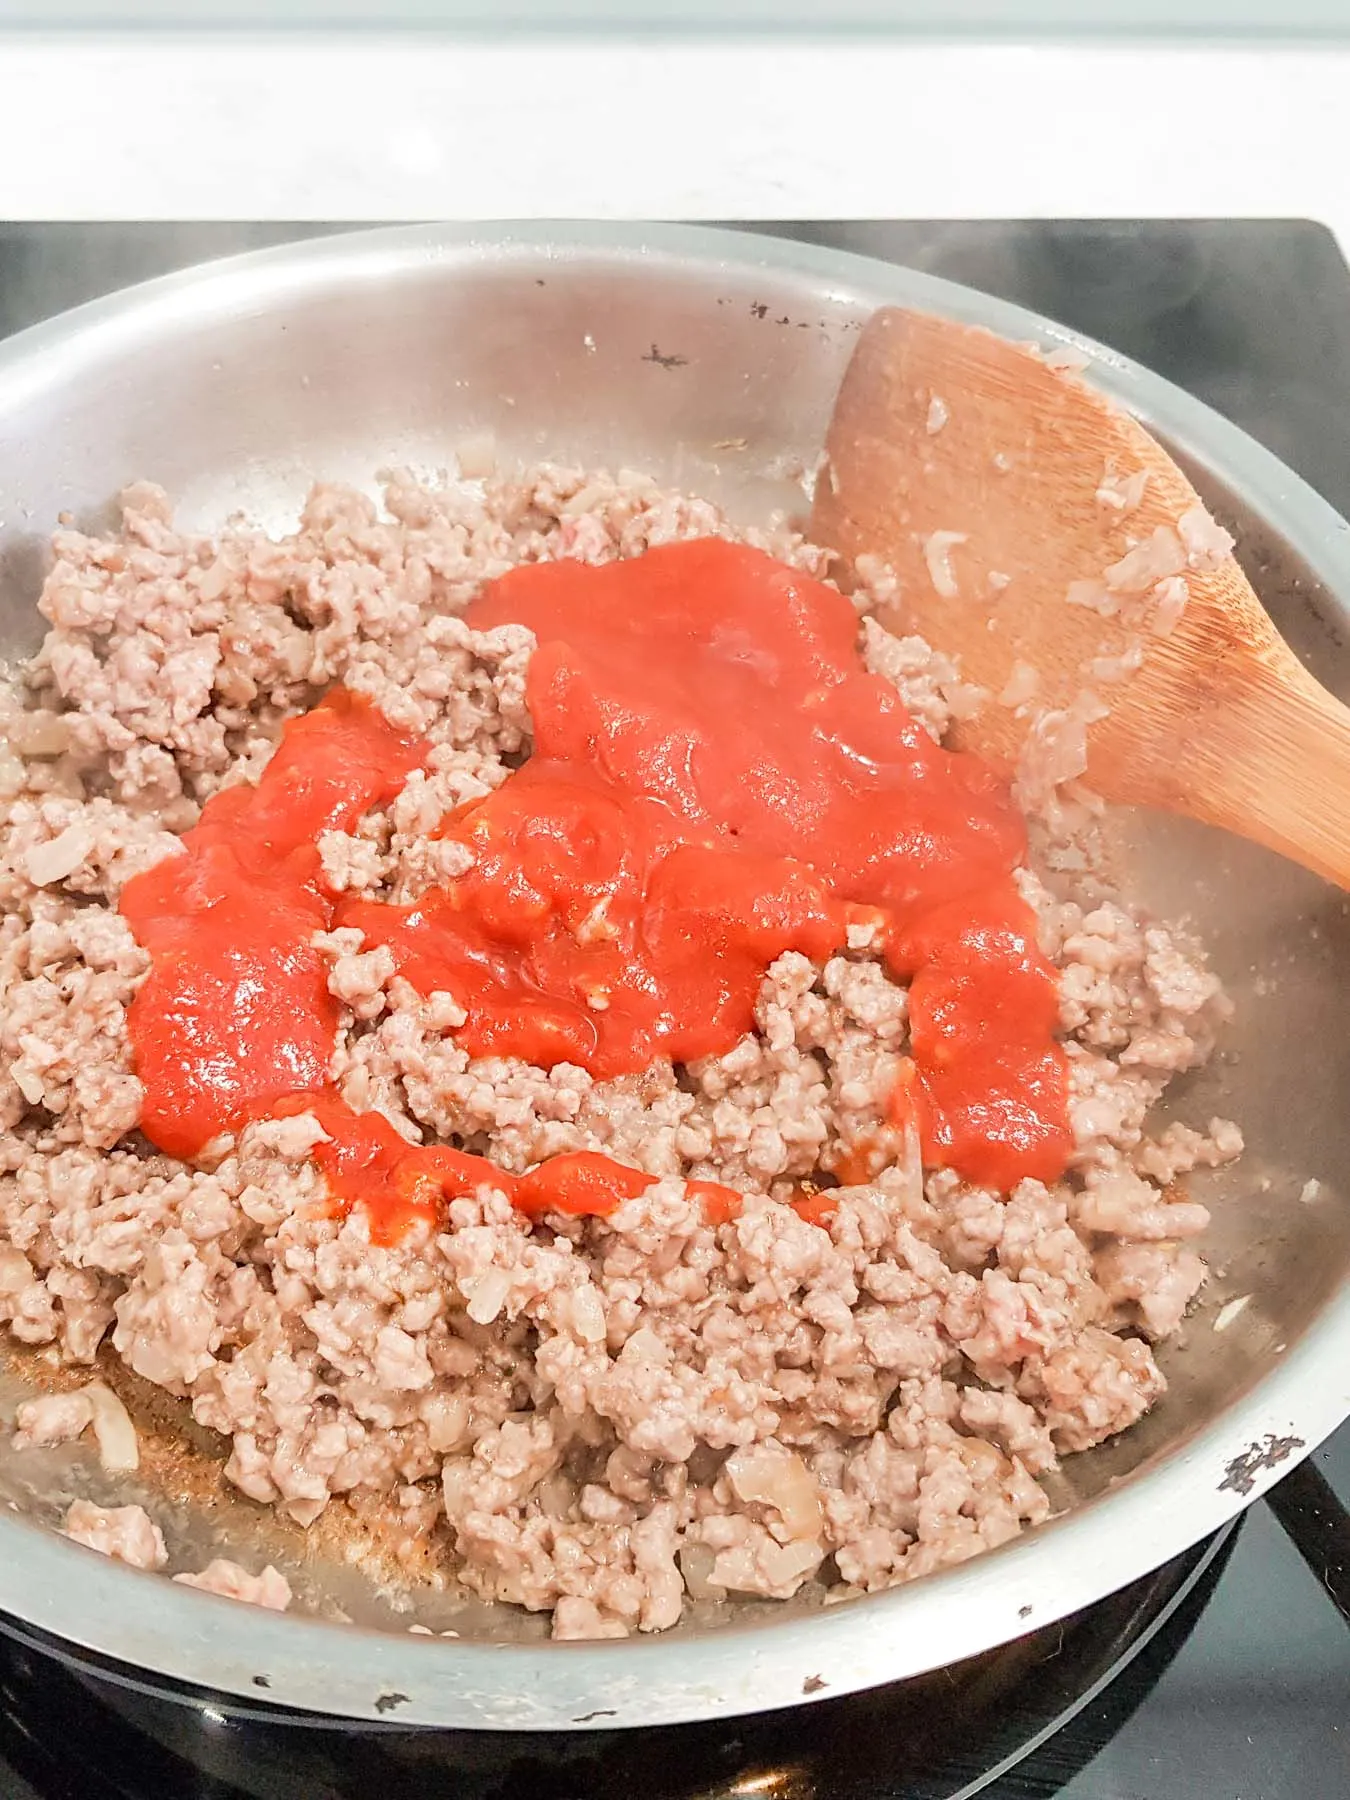 adding tomato sauce to ground beef in a skillet